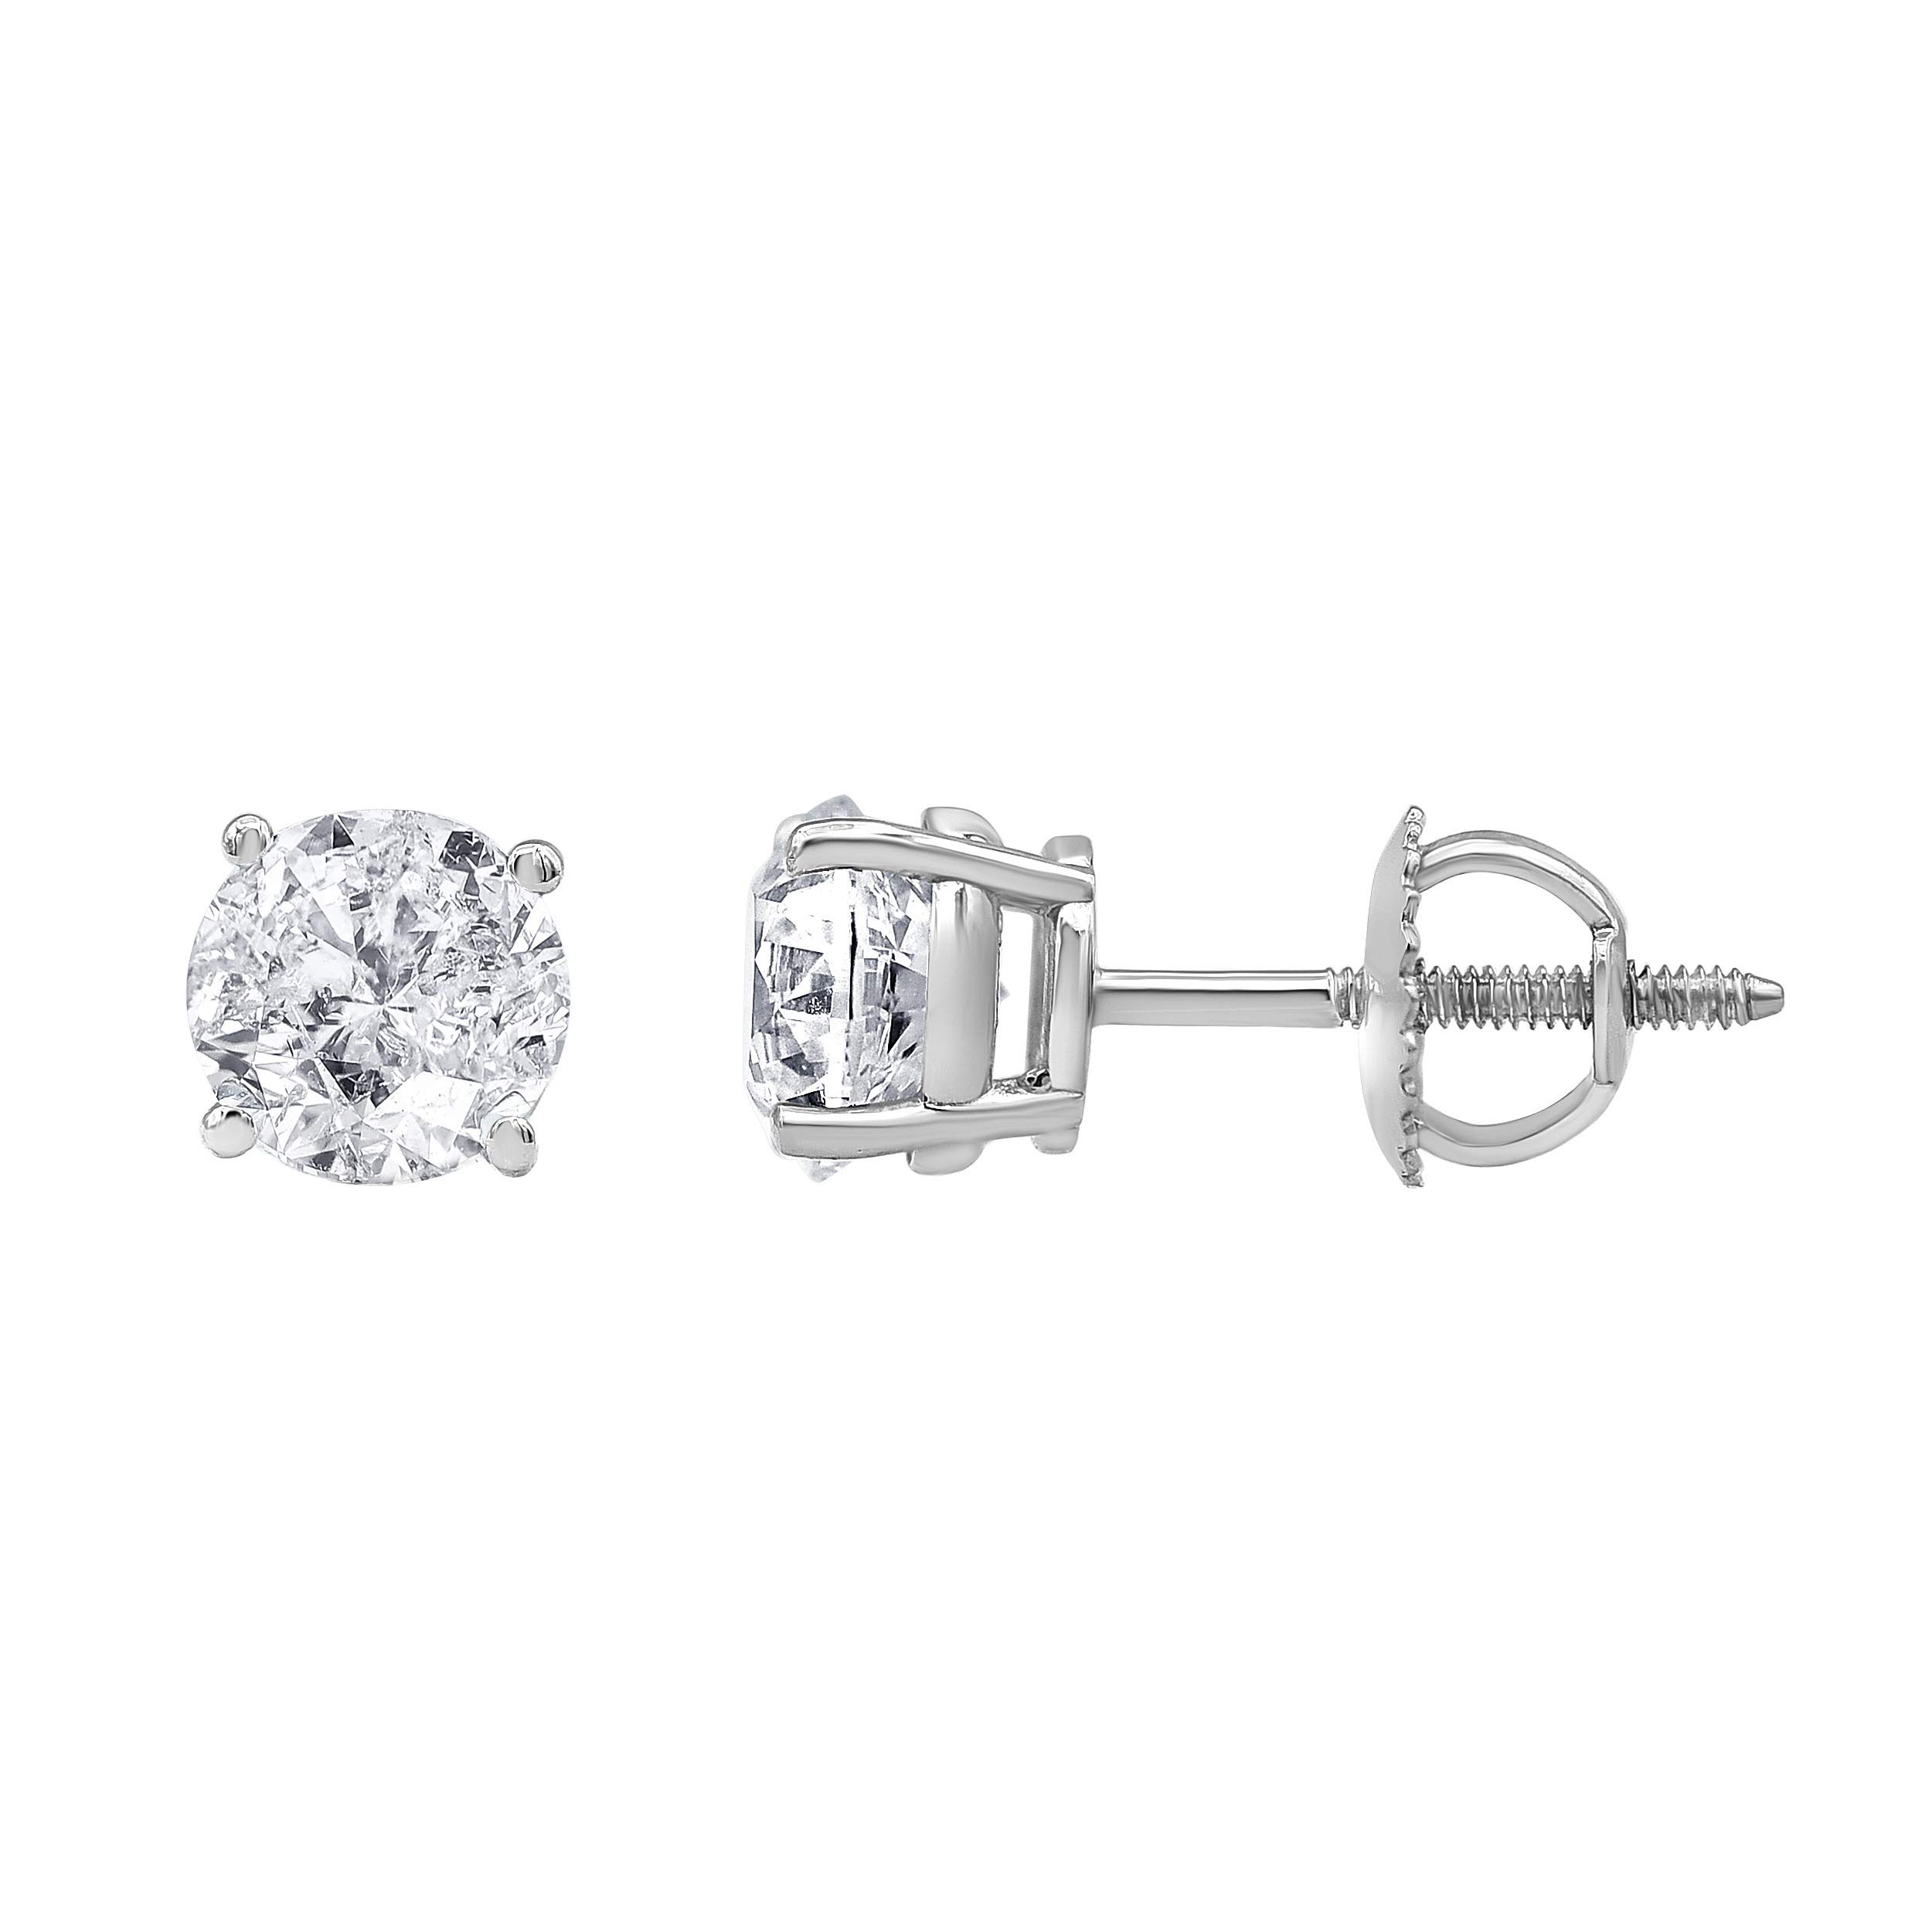 2.00 Carat Prong Set 14kt White Gold Round-Cut Solitaire Diamond Stud Earrings (J-K, I2-I3) by La4ve Diamonds | Real Diamond Stud Earrings For Women | Gift Box Included